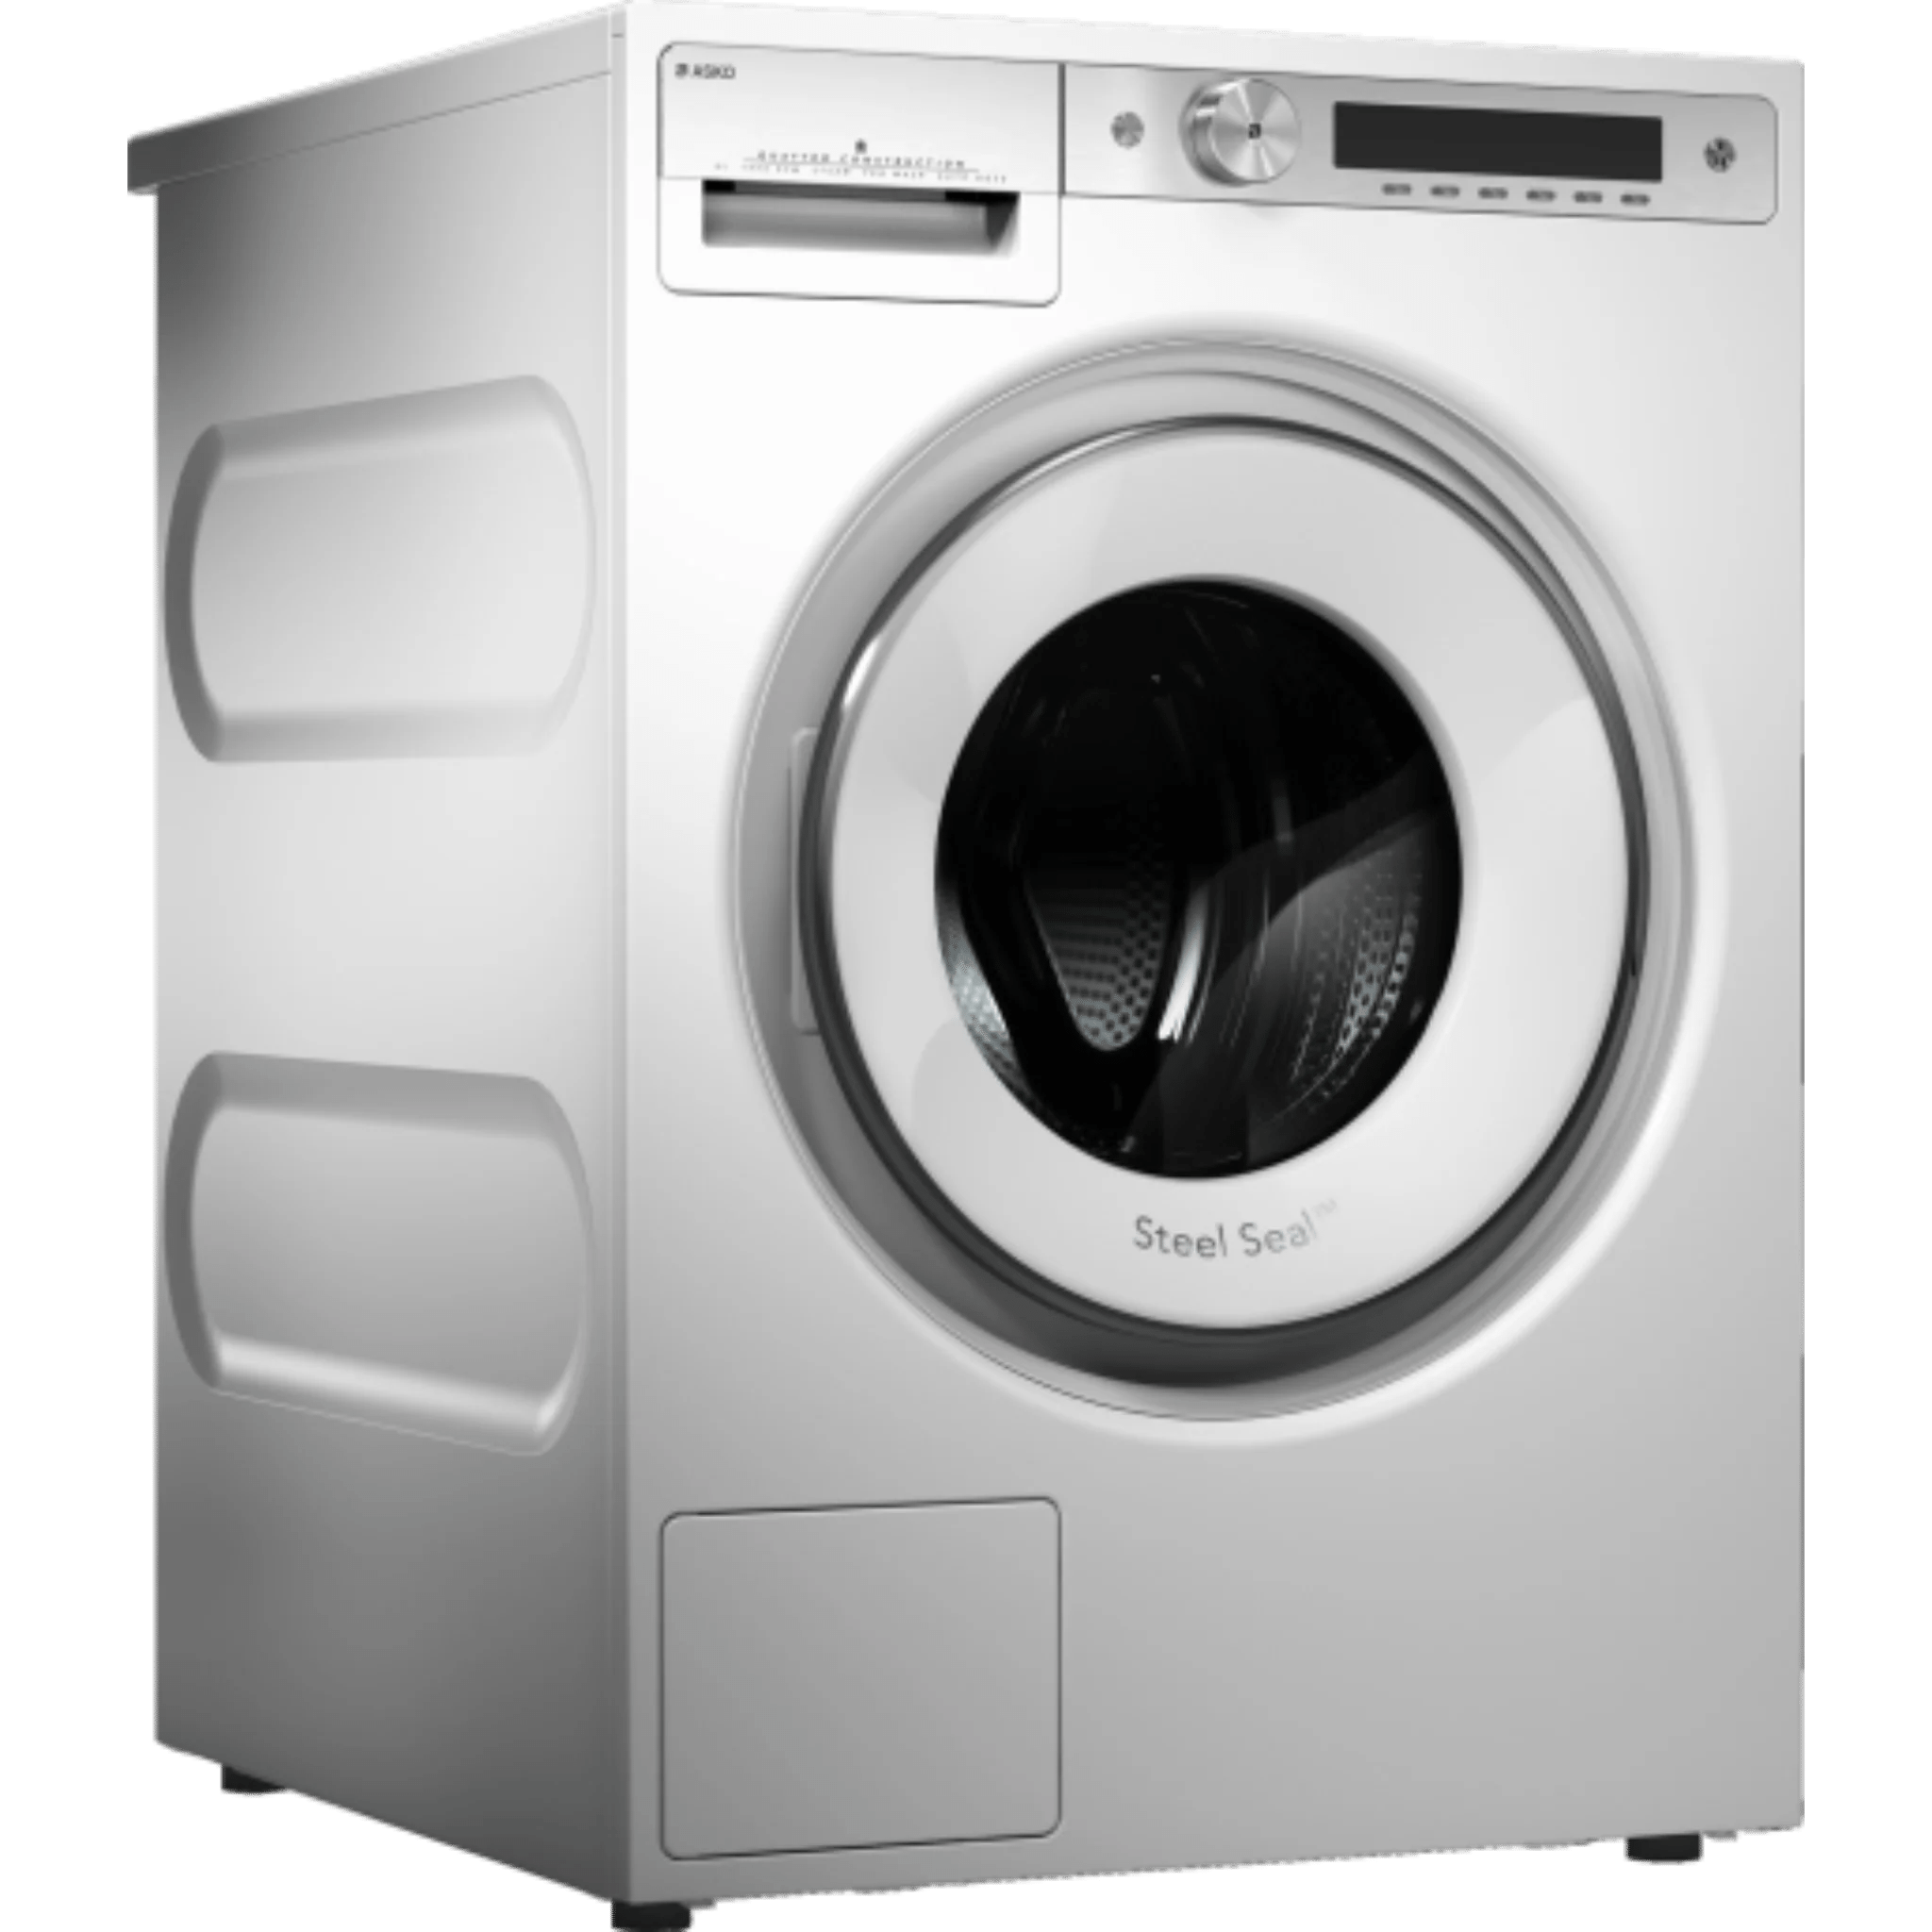 Asko Style Series 24 Inch Wide 2.8 Cu Ft. Front Loading Washer with Auto Dosing System Washers & Dryers W6124XW Luxury Appliances Direct